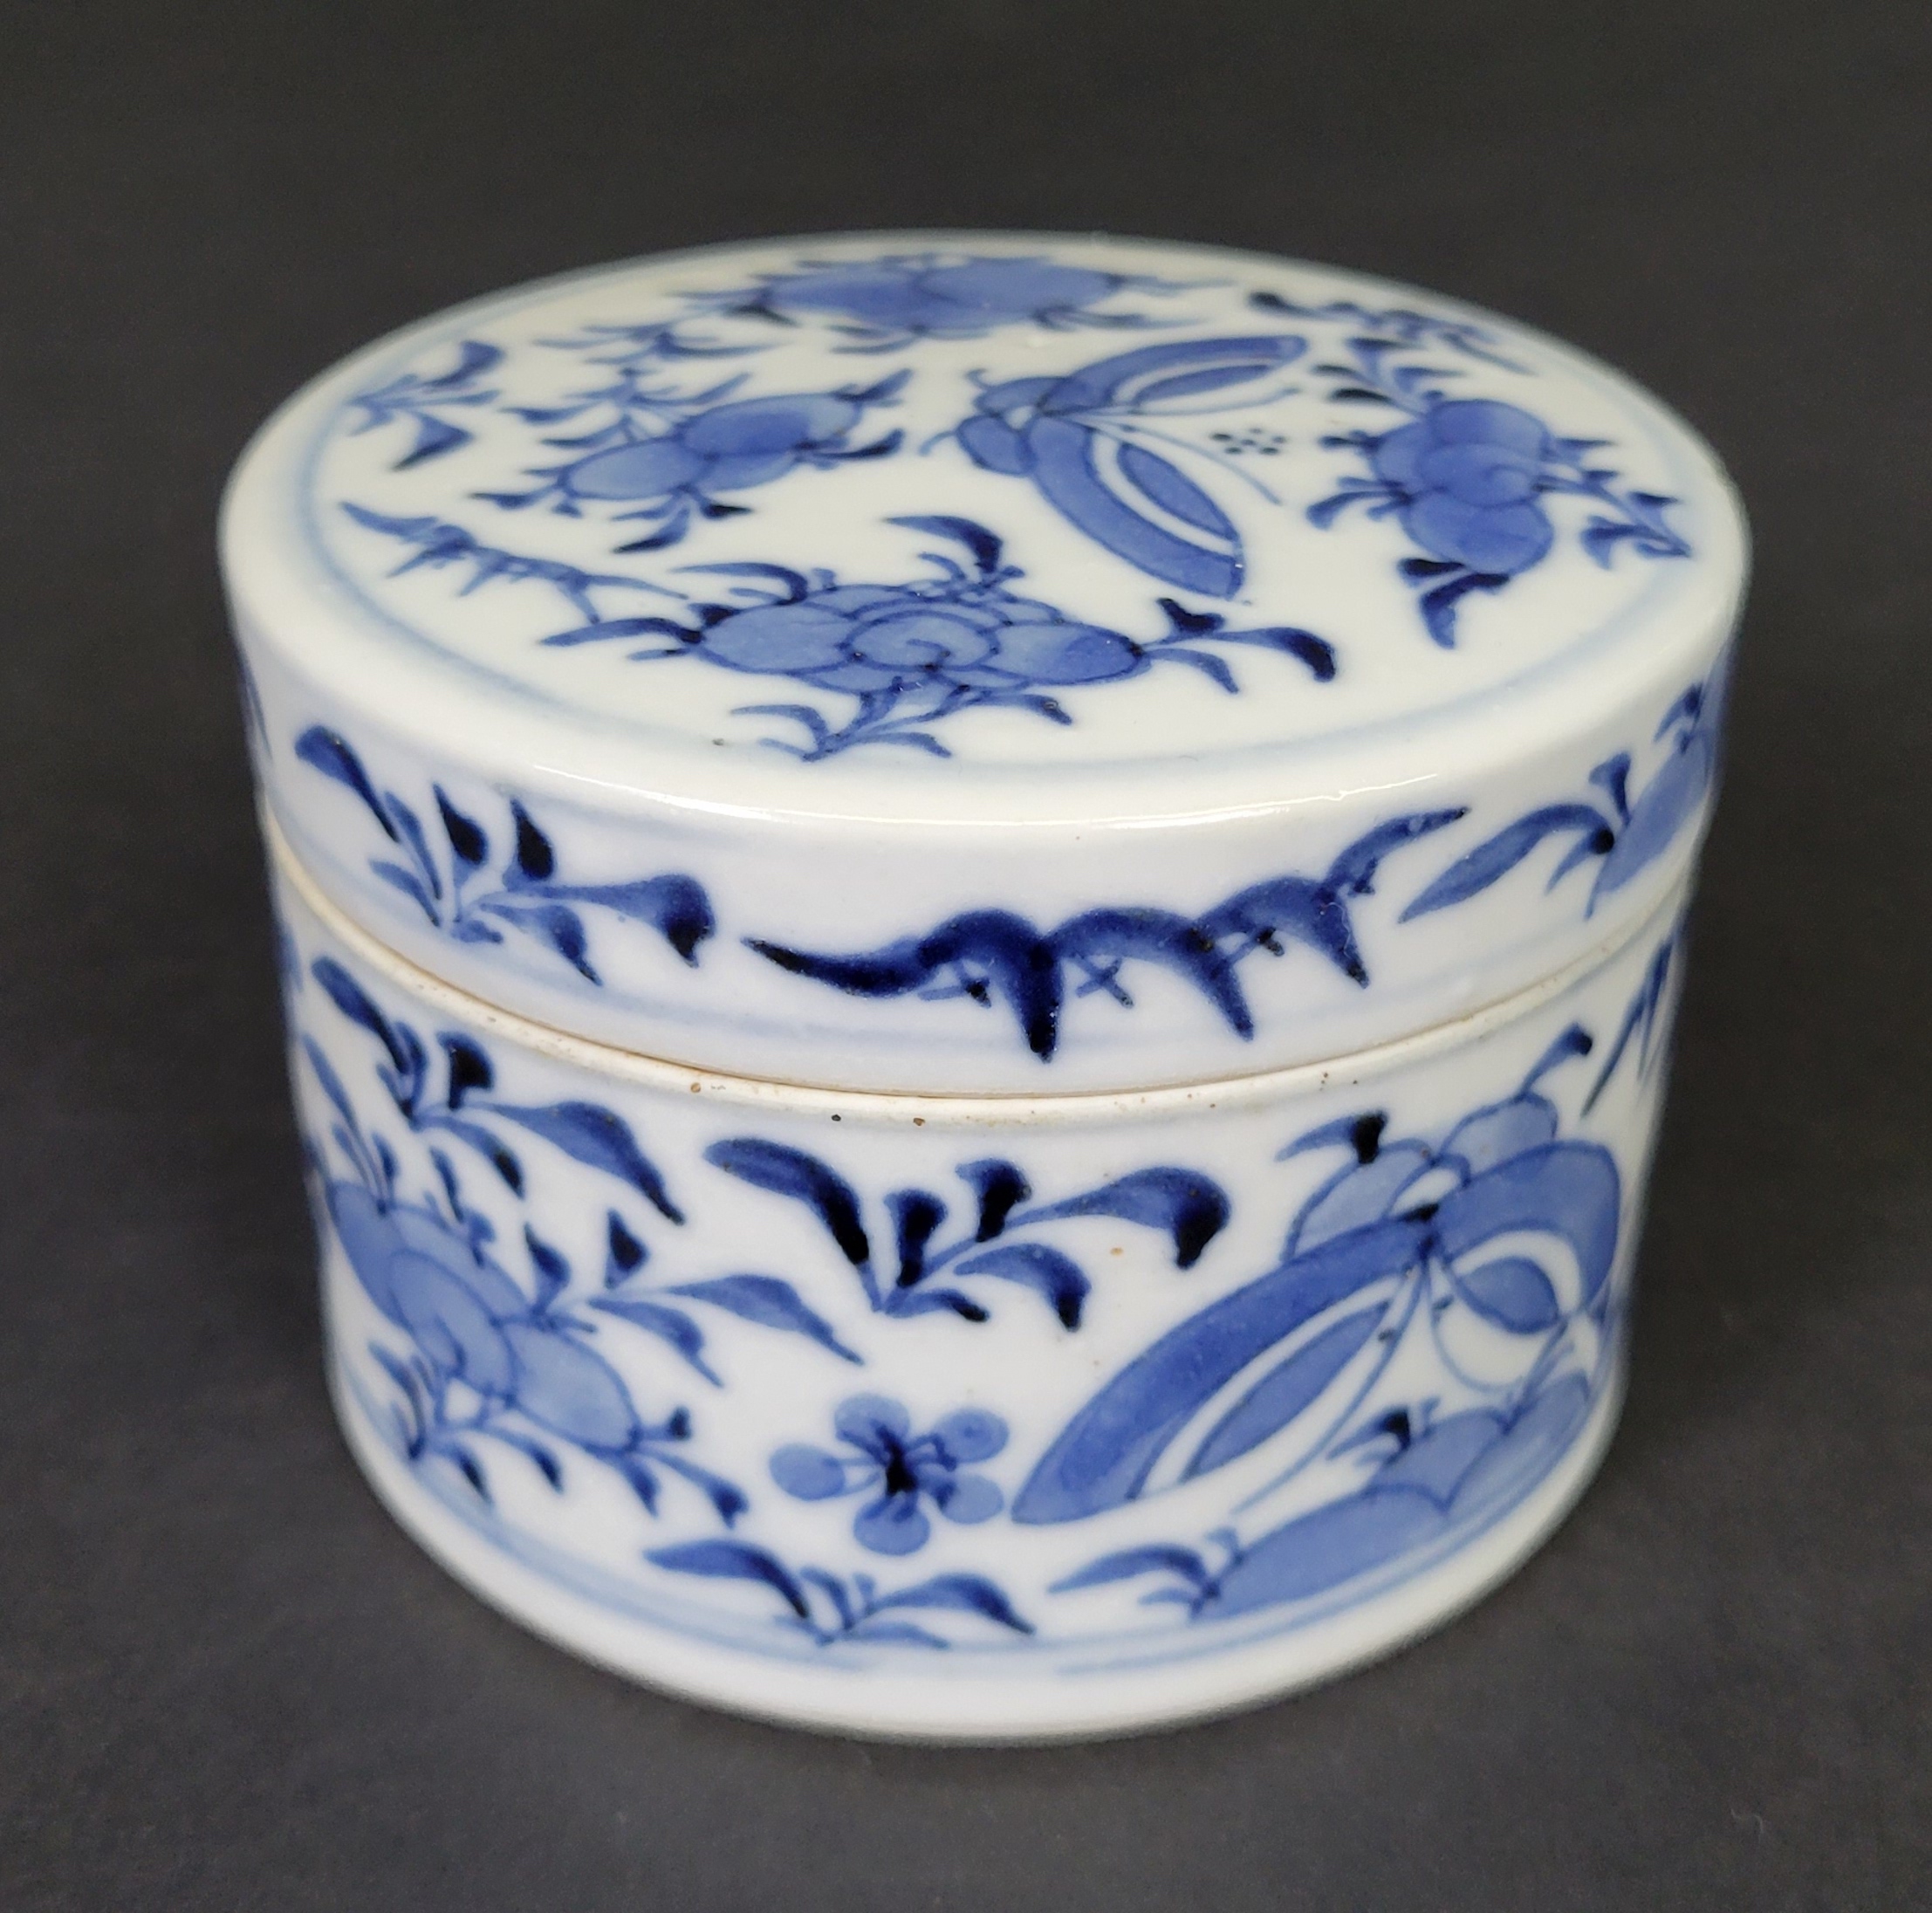 19th C. Chinese Blue & White Porcelain Covered Jar and Decorated Bowl